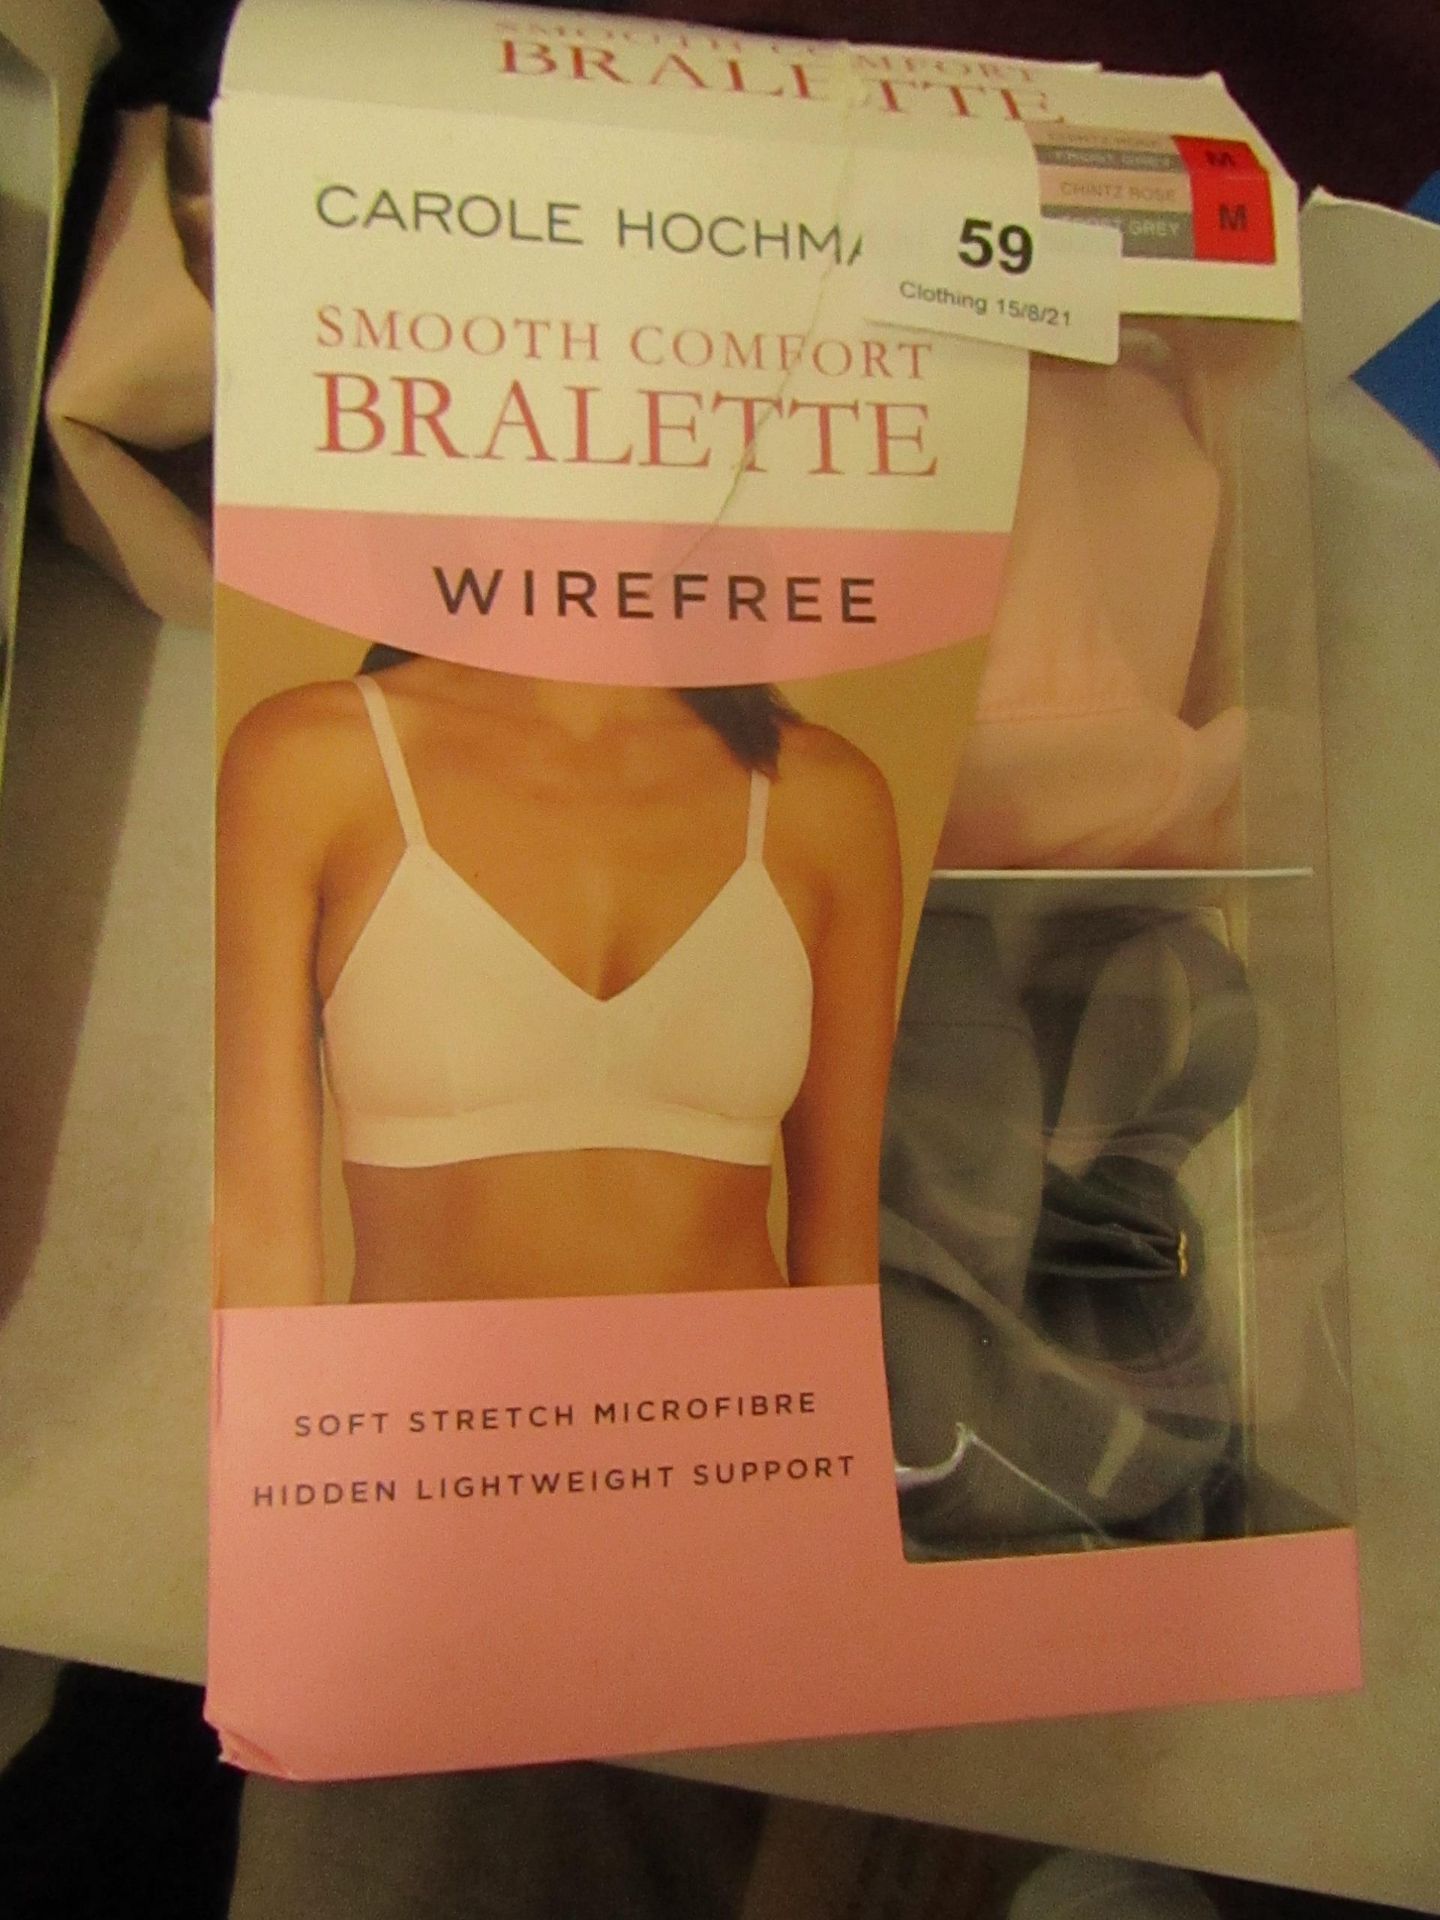 Carol Hockman pack of 2 wire free Bralettes, with packaging, szie Medium